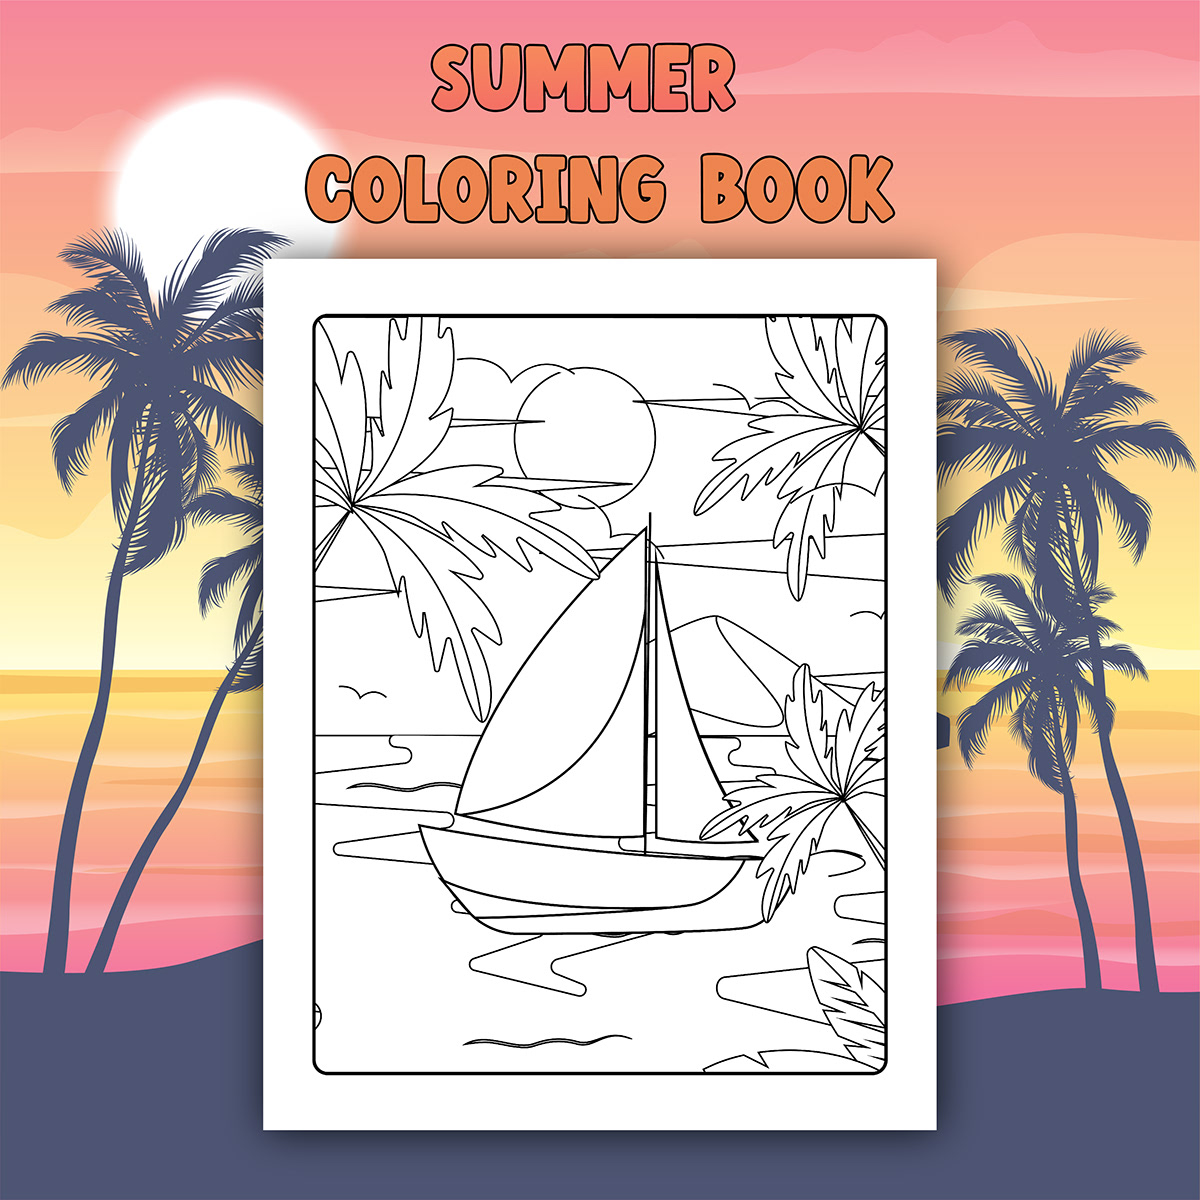 Coloring Pages coloring book line art vector Digital Art  ILLUSTRATION  Coloring Page For Adults coloring page for kdp coloring page for kids summer coloring book